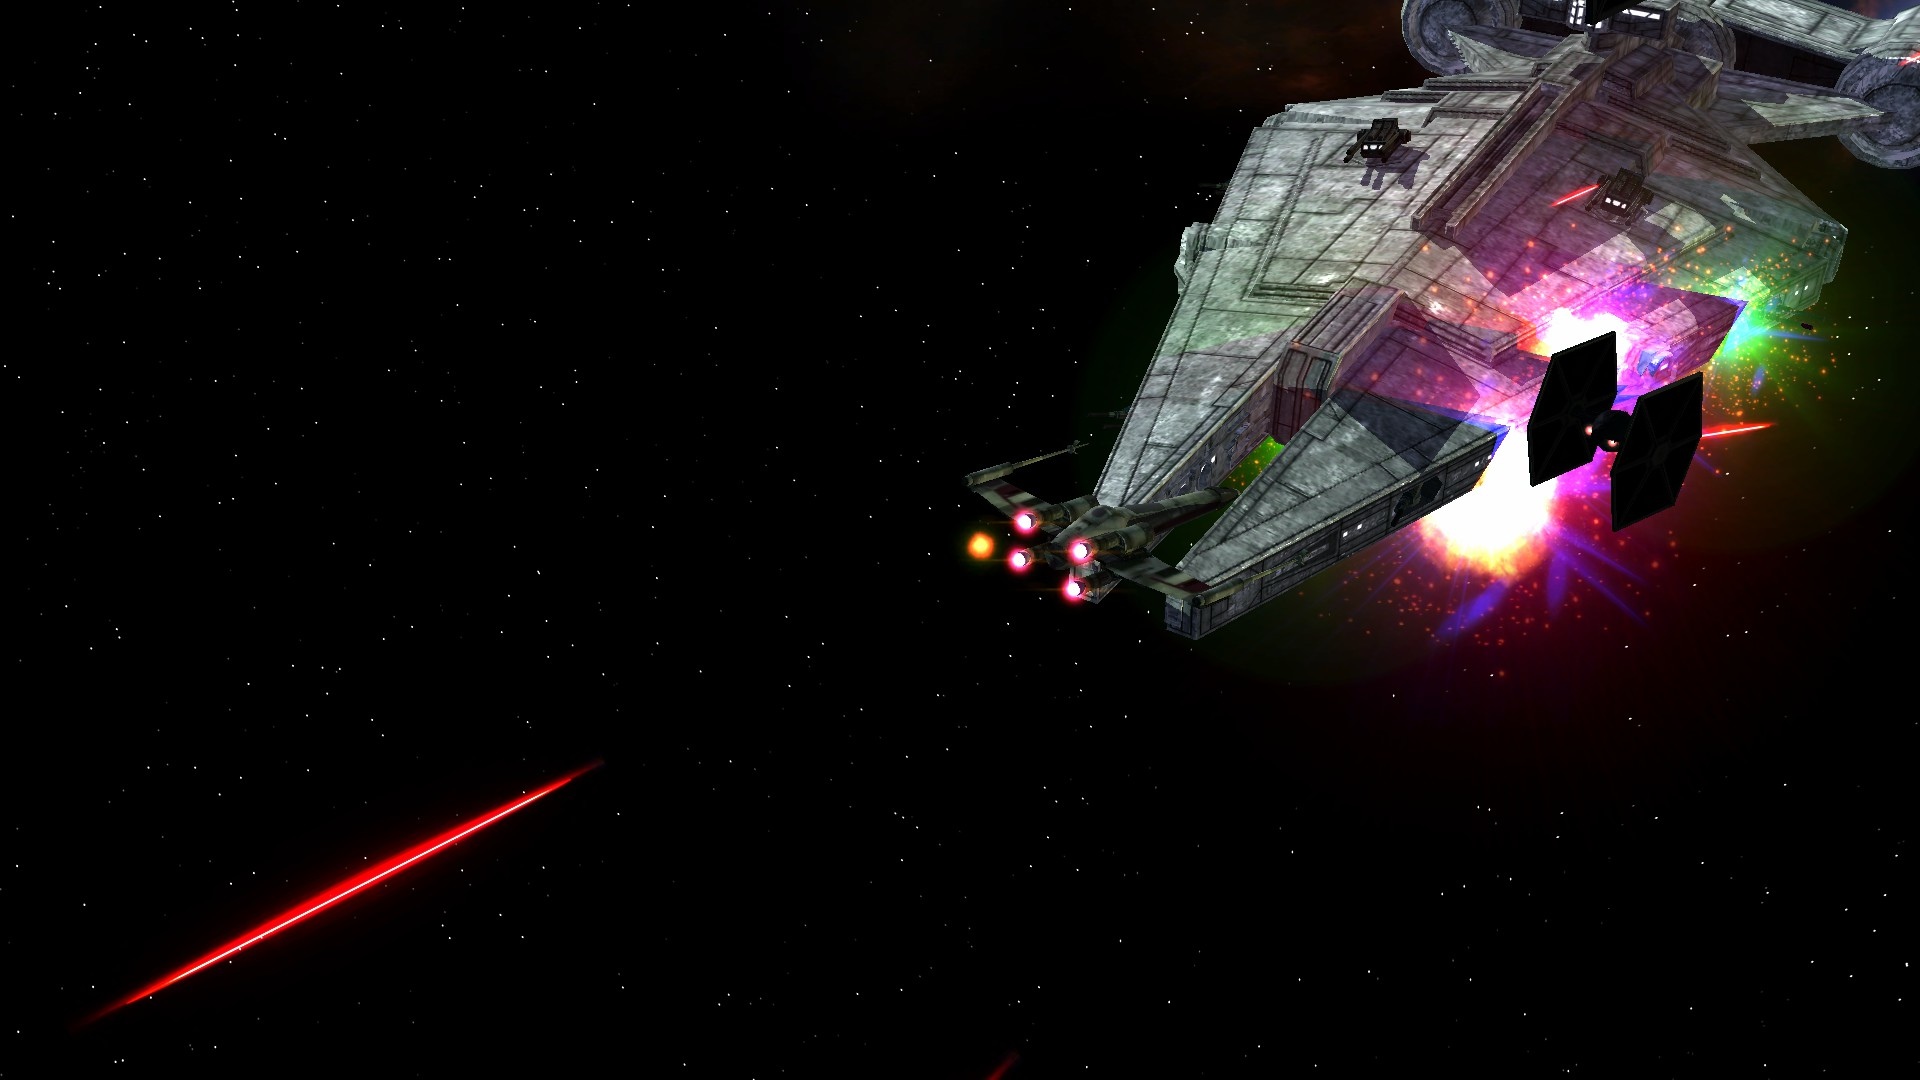 Rebel Z-95 engaging TIE Fighter over an Arquitens cruiser.